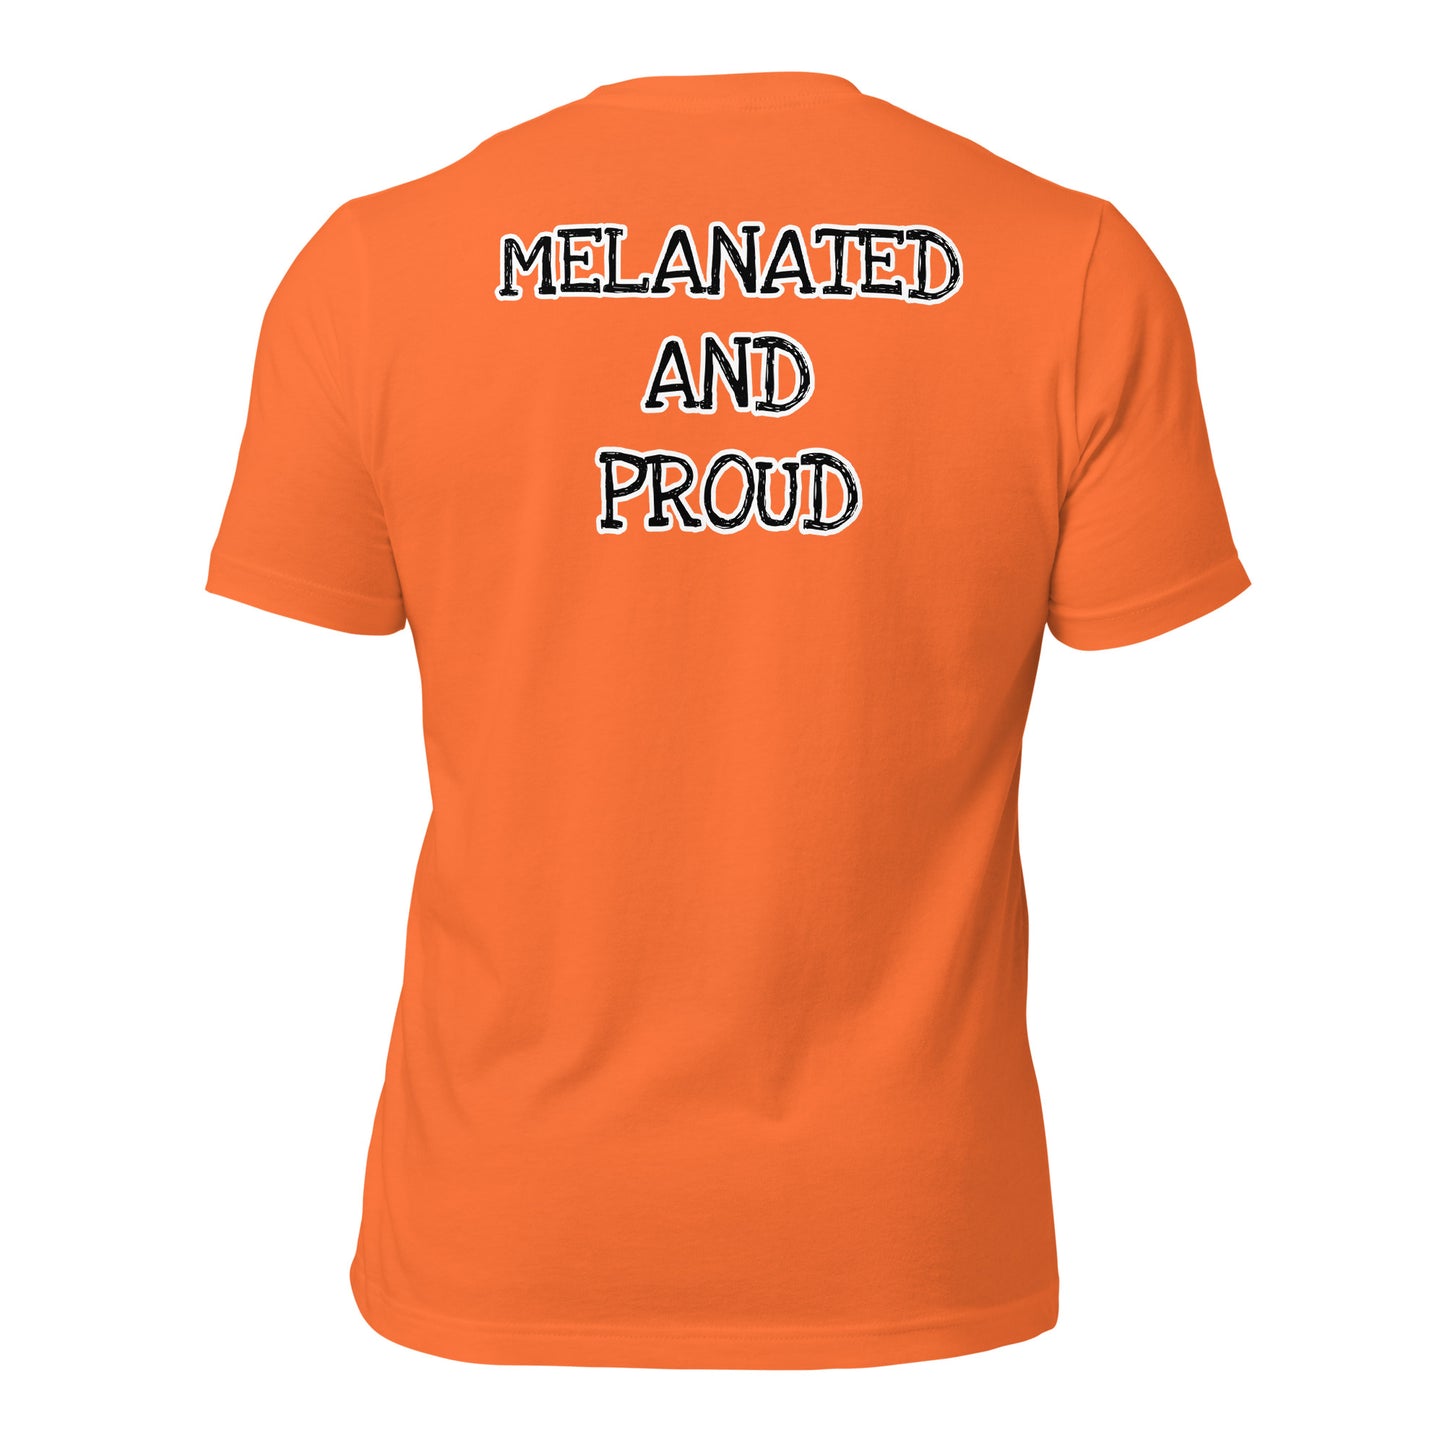 MELANATED AND PROUD